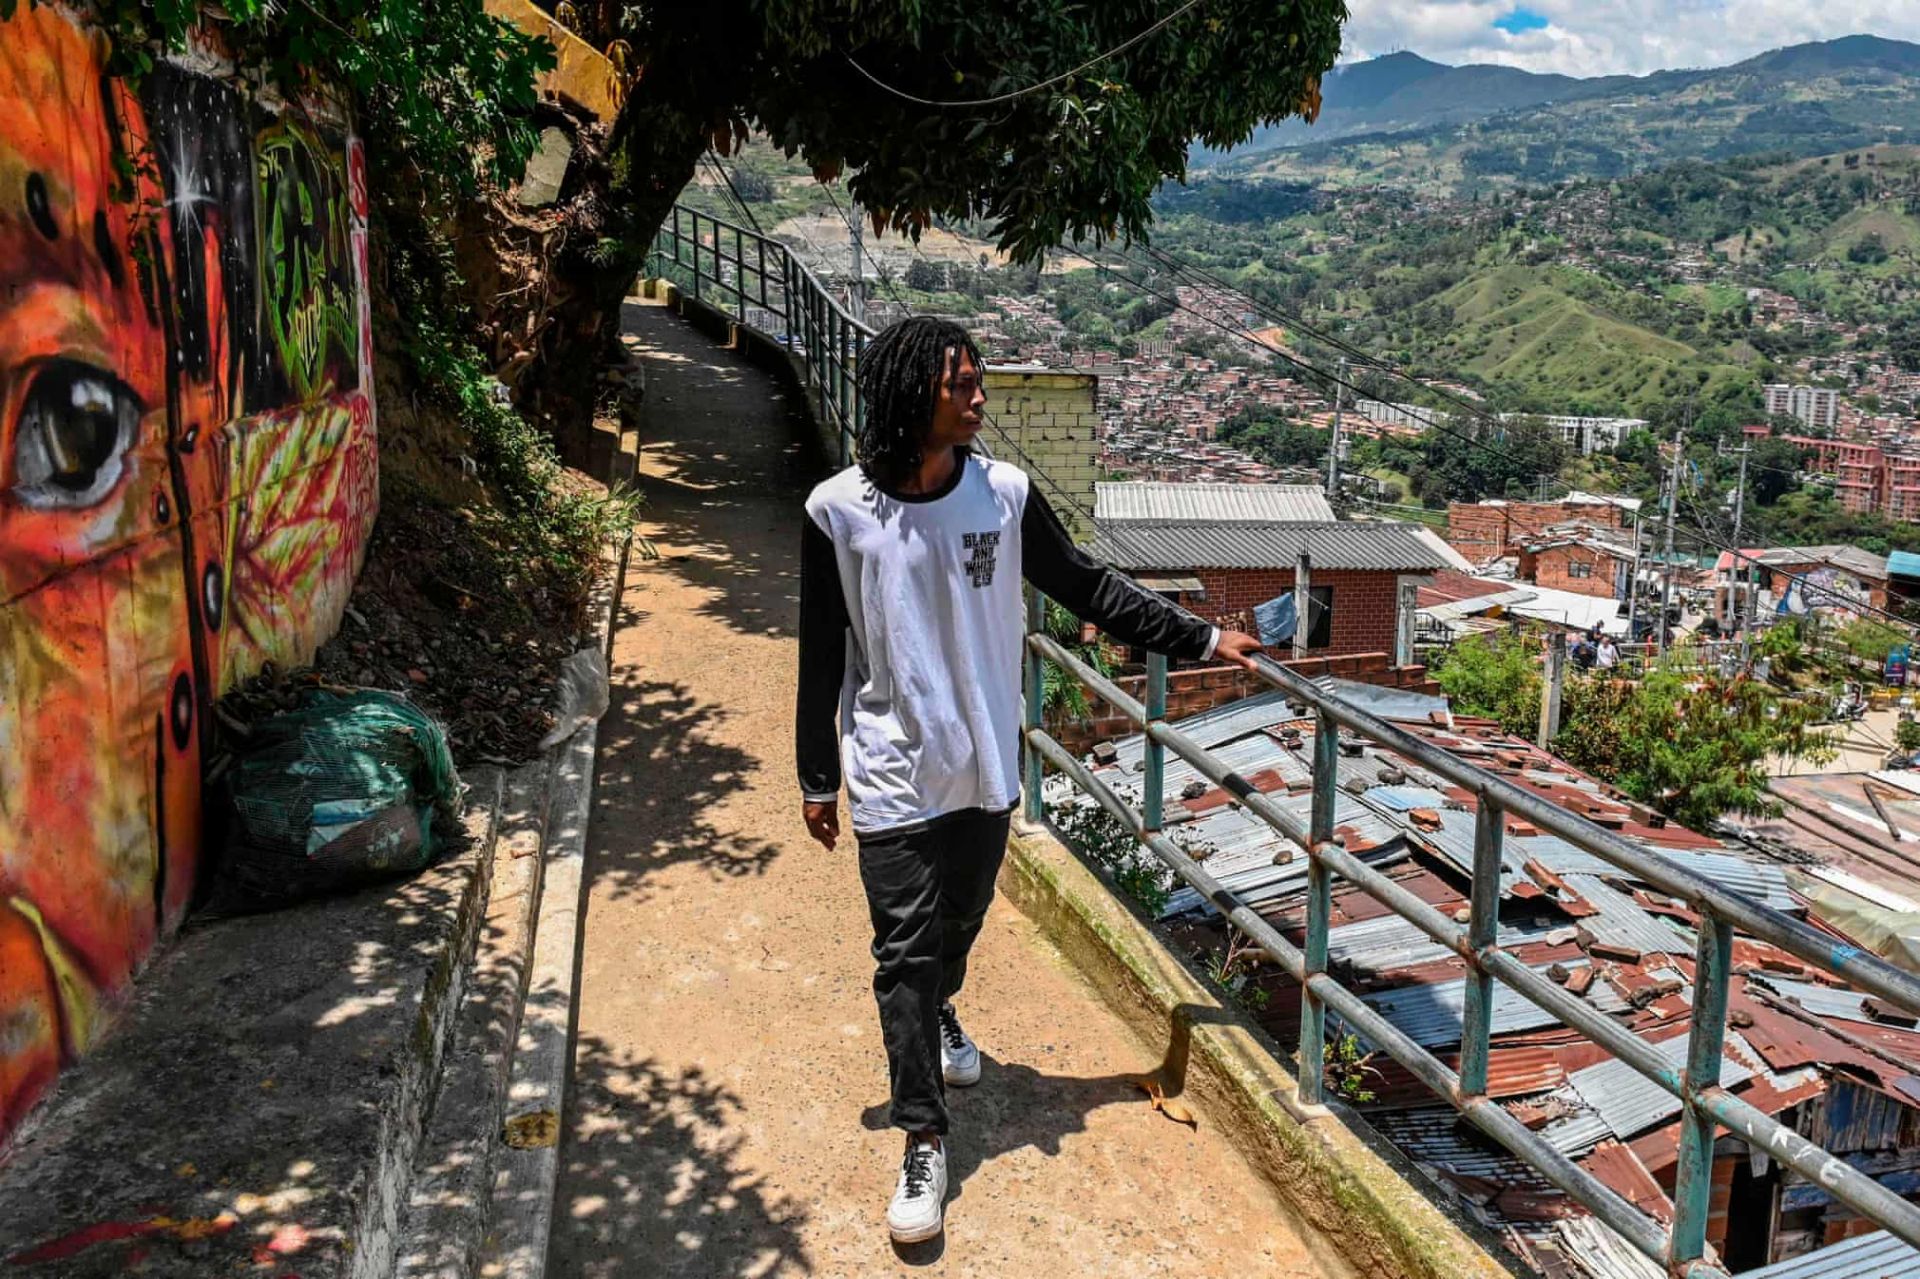 comuna 13 tu thanh pho nguy hiem nhat the gioi den thanh dia du lich colombia